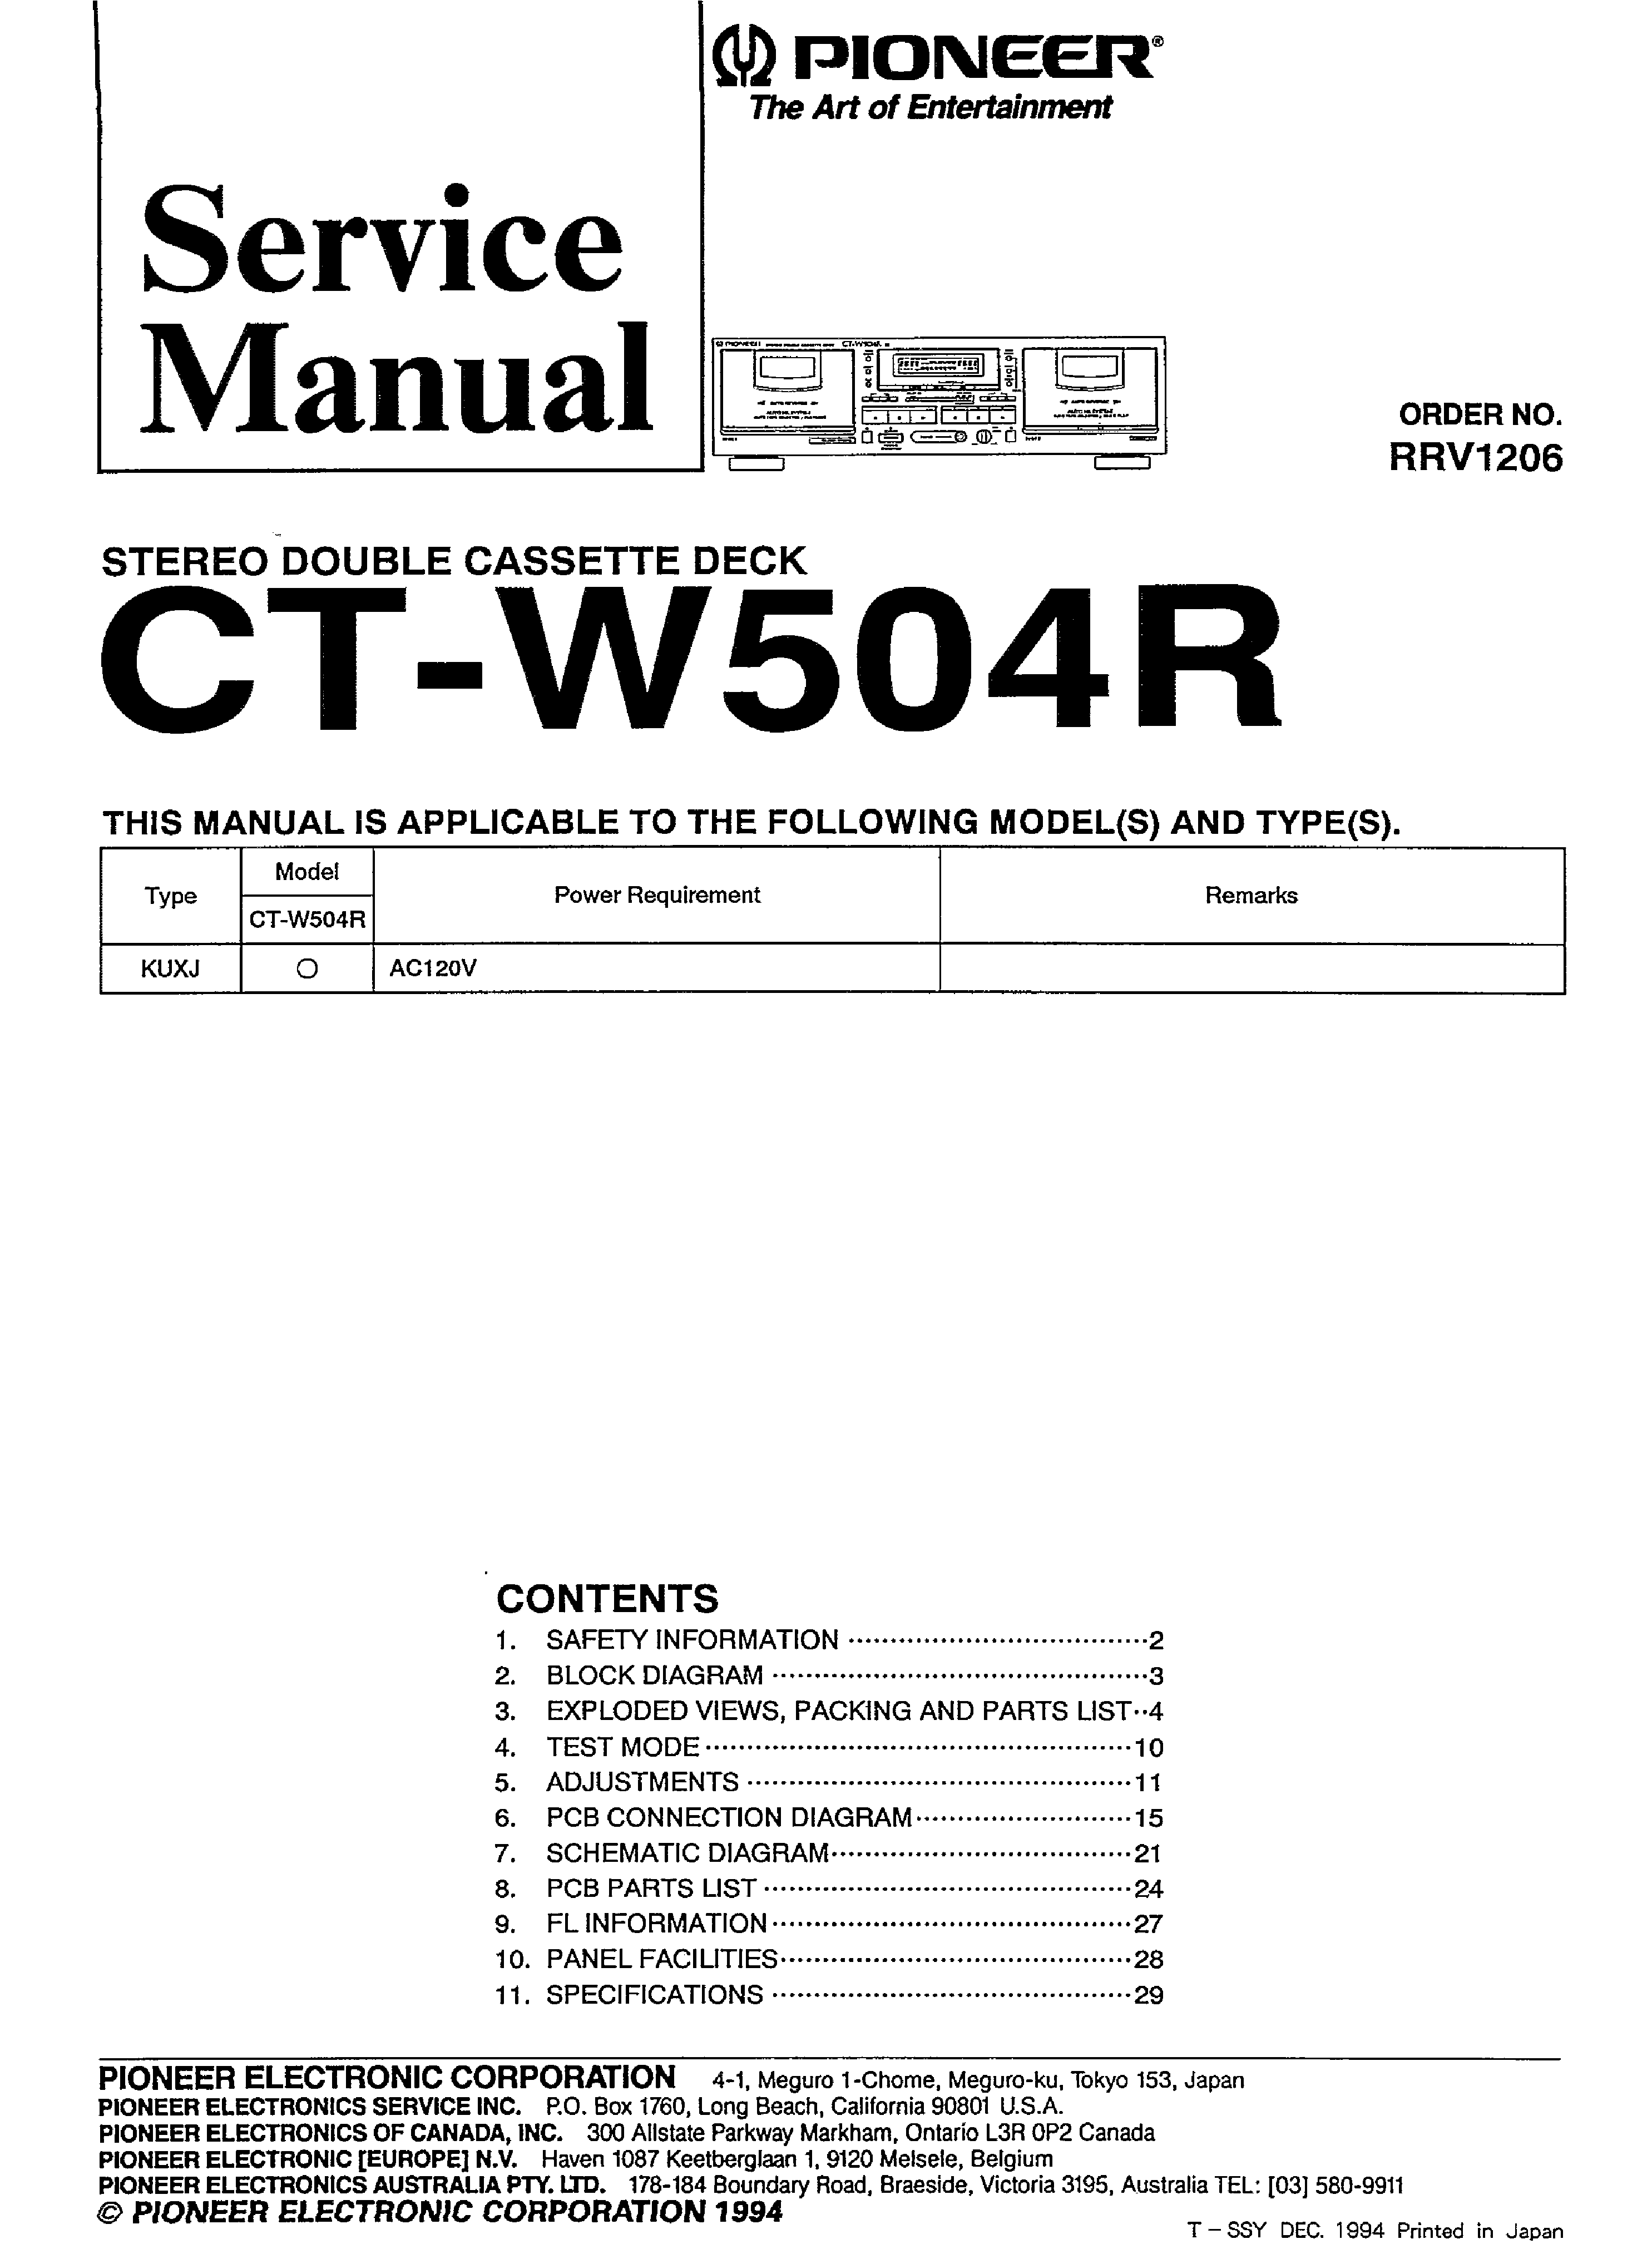 PIONEER CT-W504R service manual (1st page)